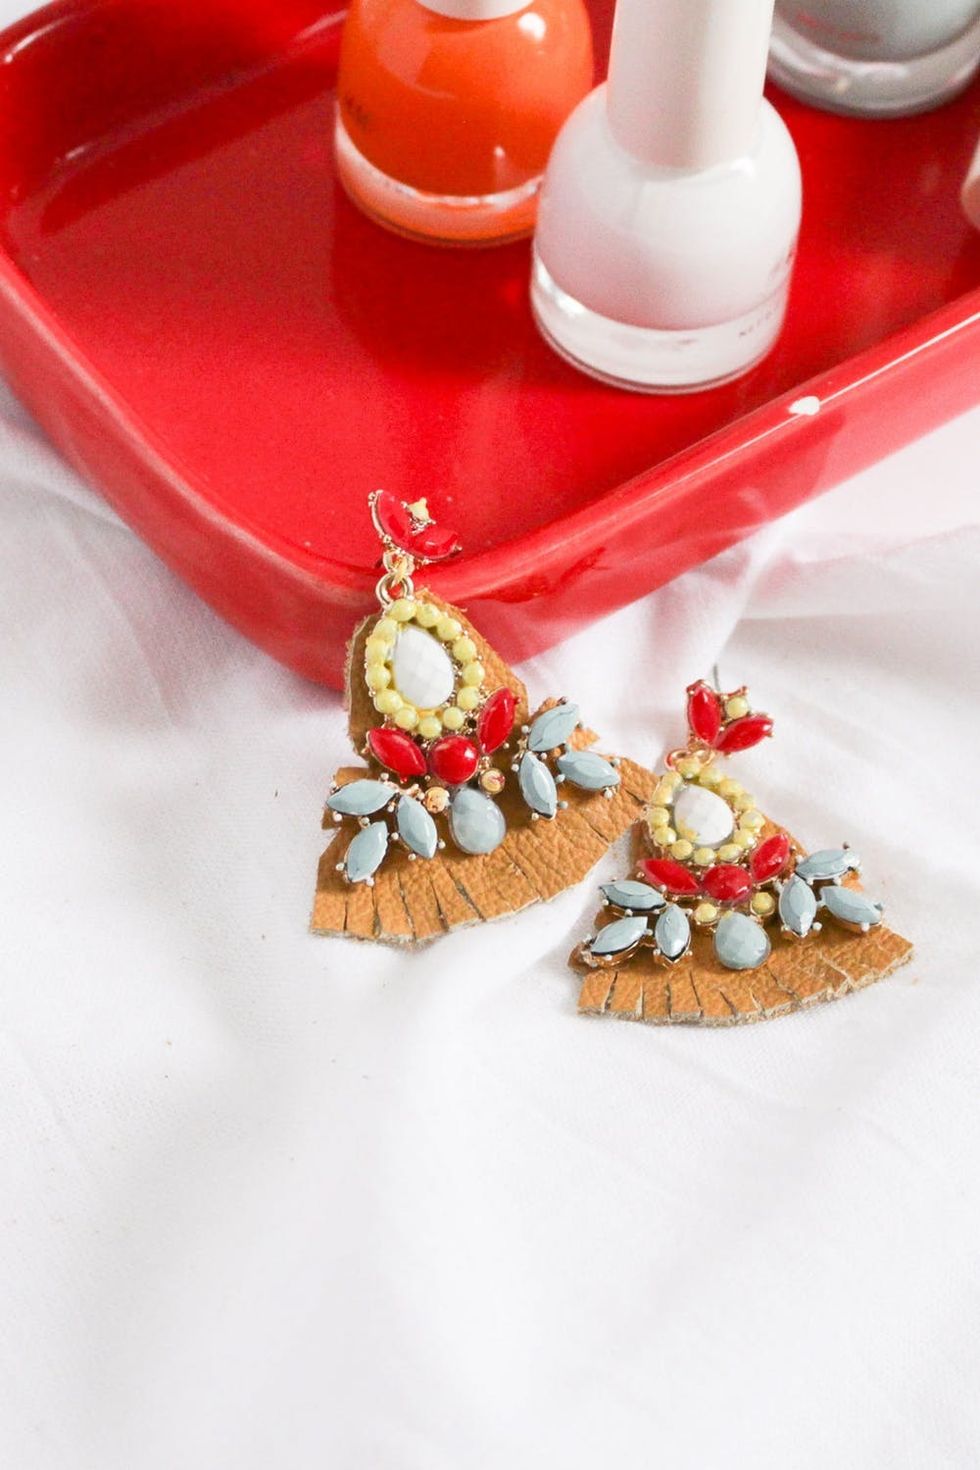 DIY Copycat: Create these Anthropologie Earrings for Next to Nothing